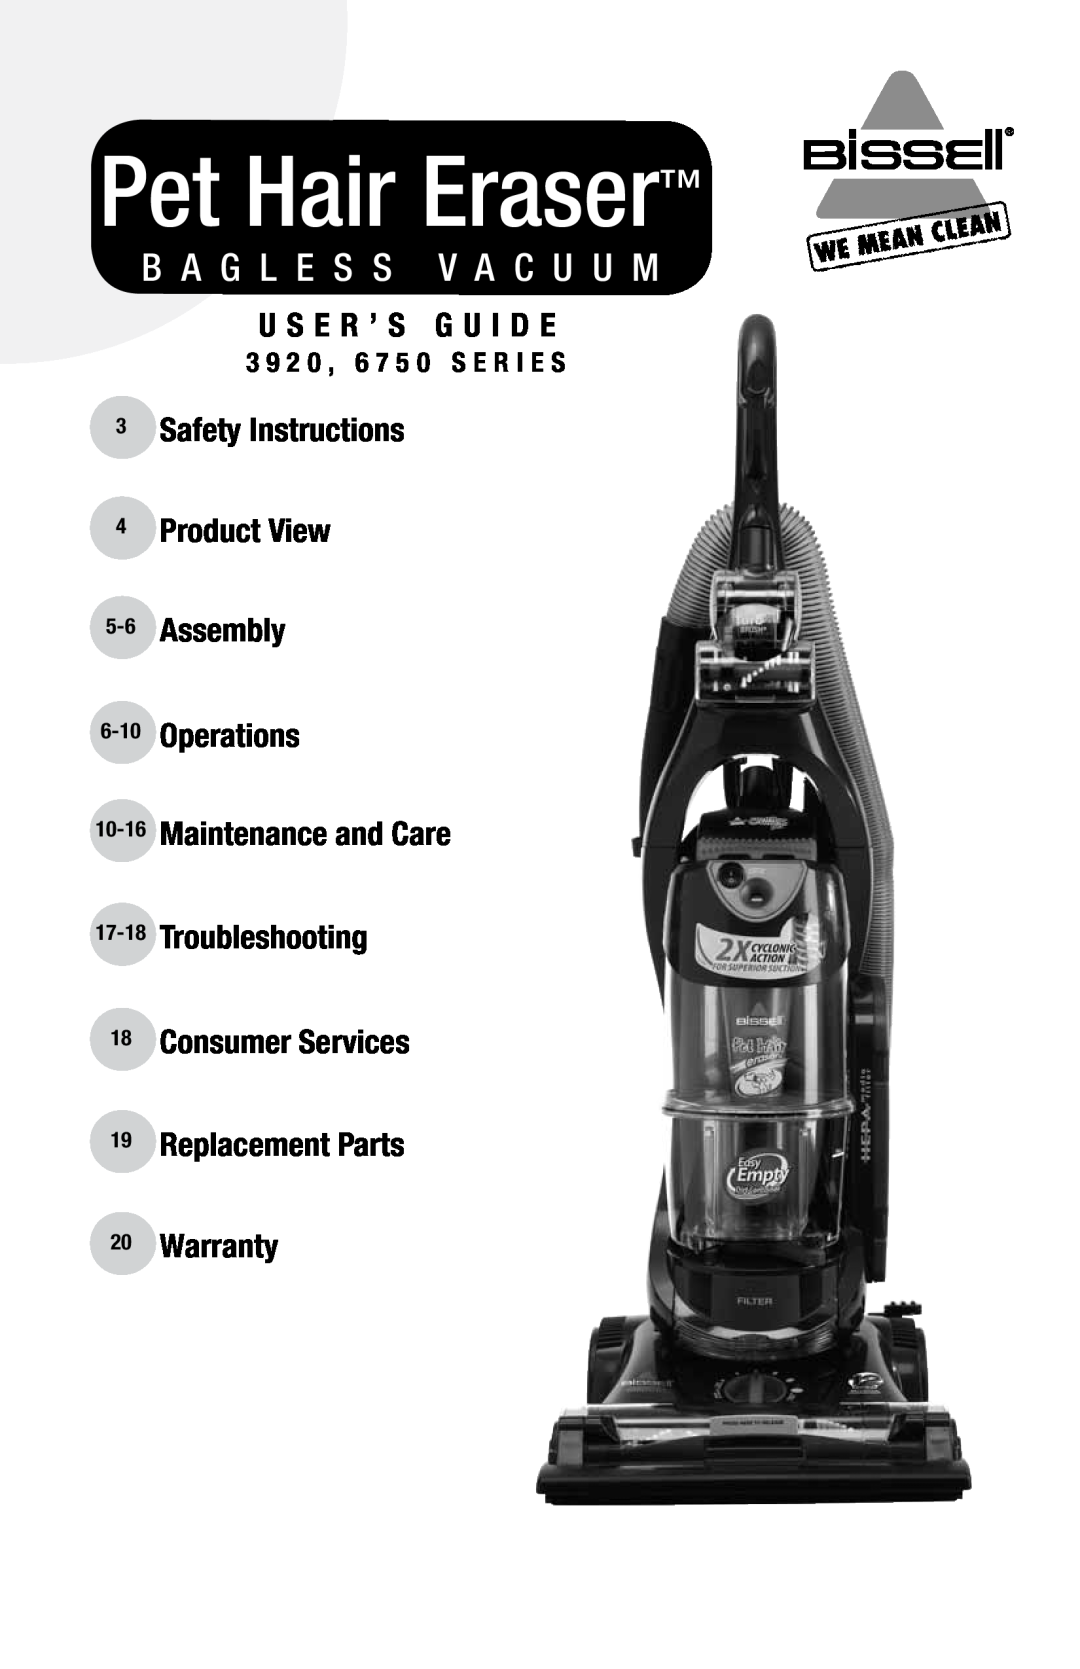 Bissell 3920, 6750 warranty U S E R ’ S G U I D E, 3Safety Instructions 4Product View 5-6 Assembly, Pet Hair Eraser 